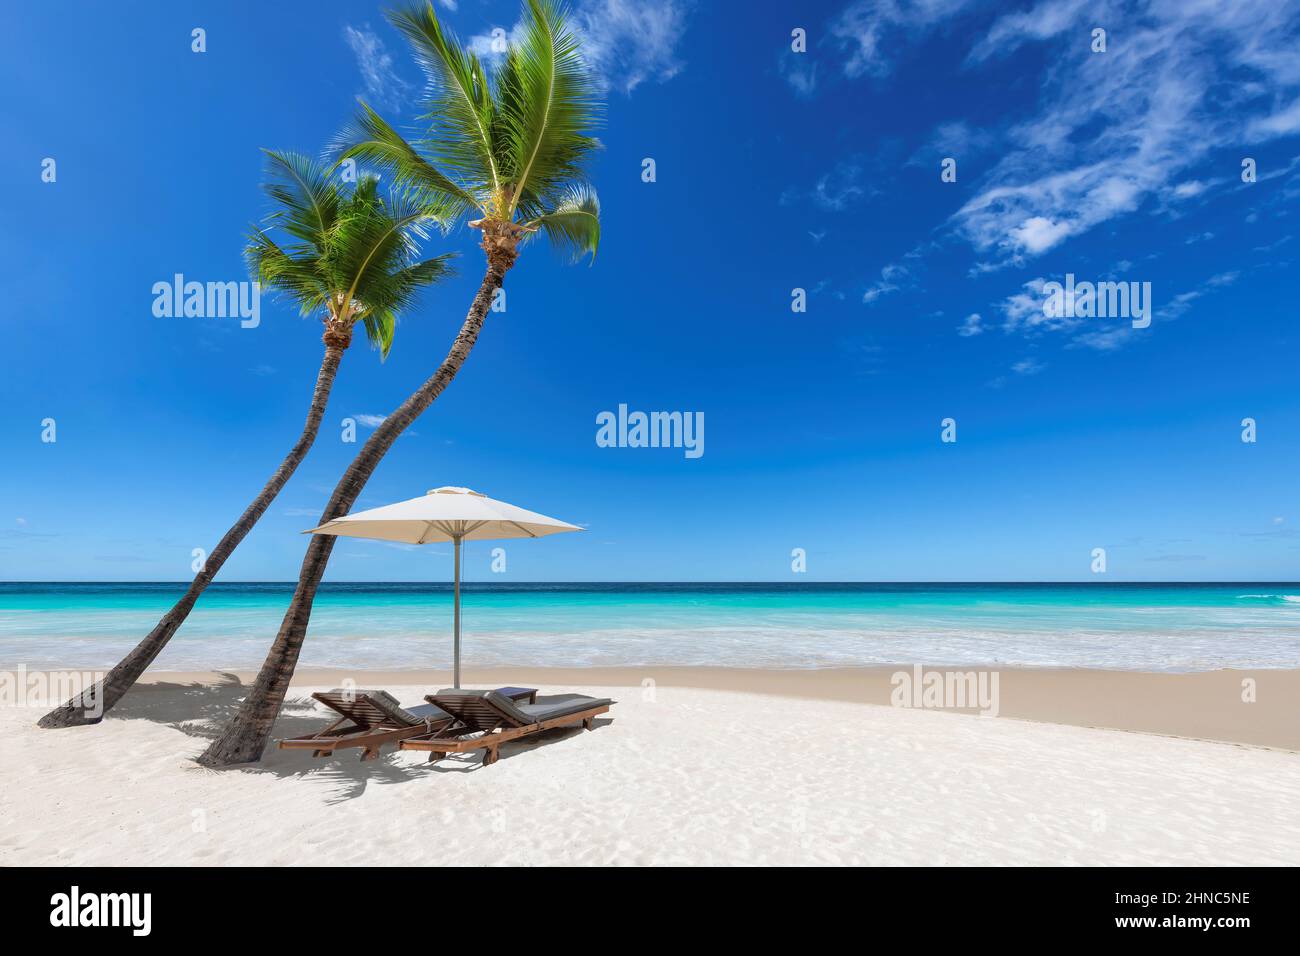 Coco palms, chairs and umbrella in sunny tropical Palm Beach and turquoise sea. Stock Photo